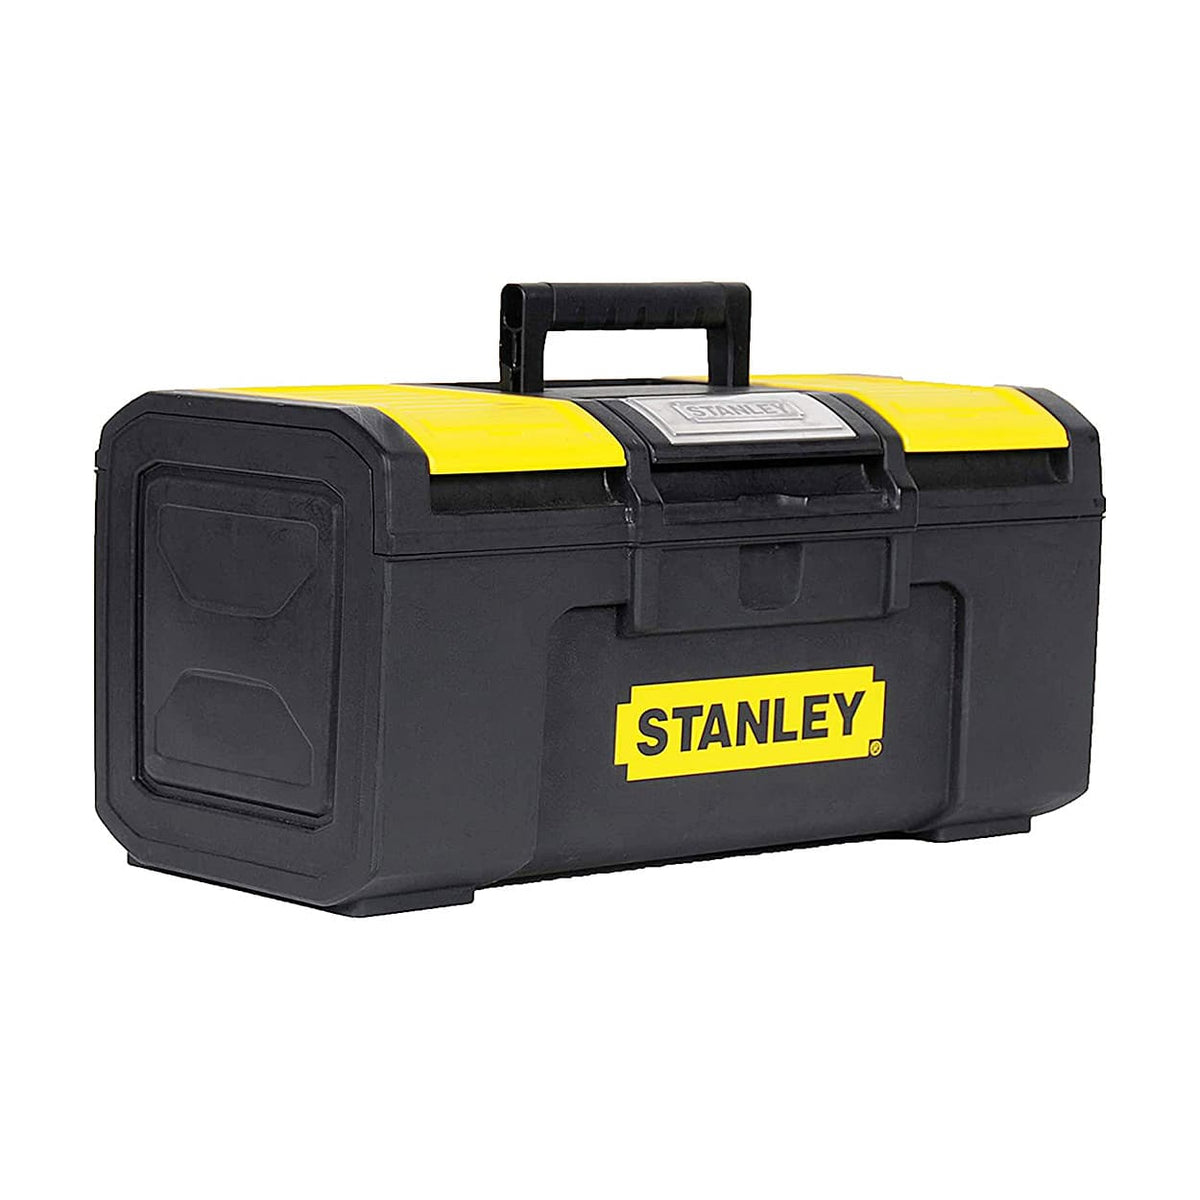 Stanley 24 in. 1-Touch Latch Tool Box with Lid Organizers